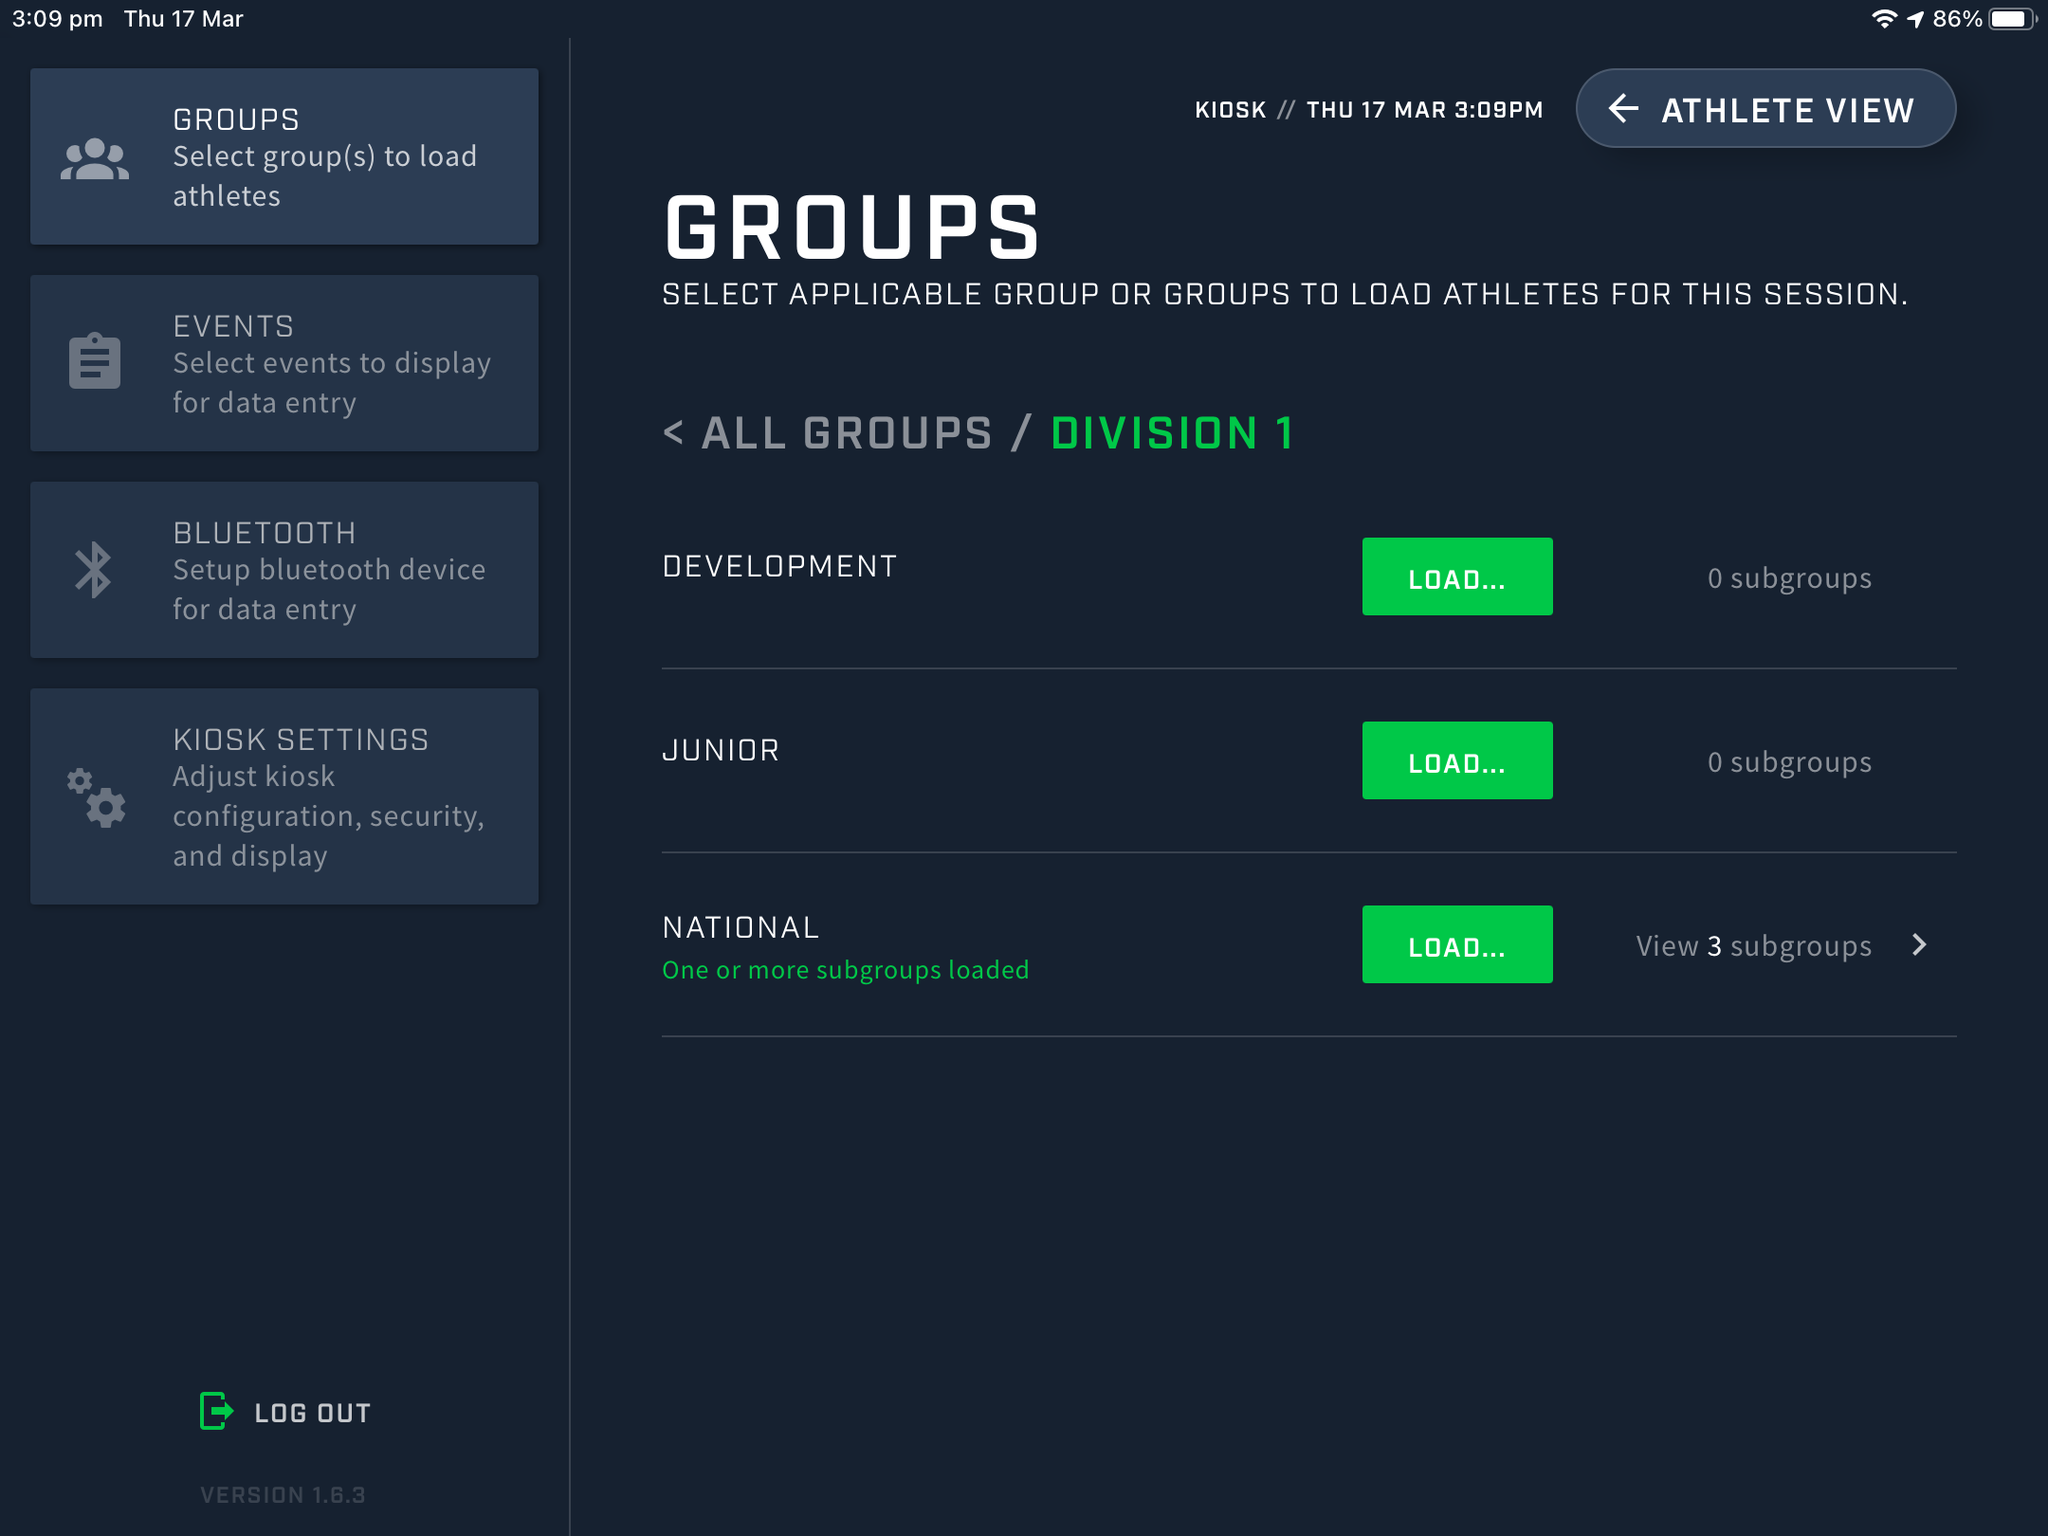 A screenshot showing the Groups settings screen on the Kiosk app.